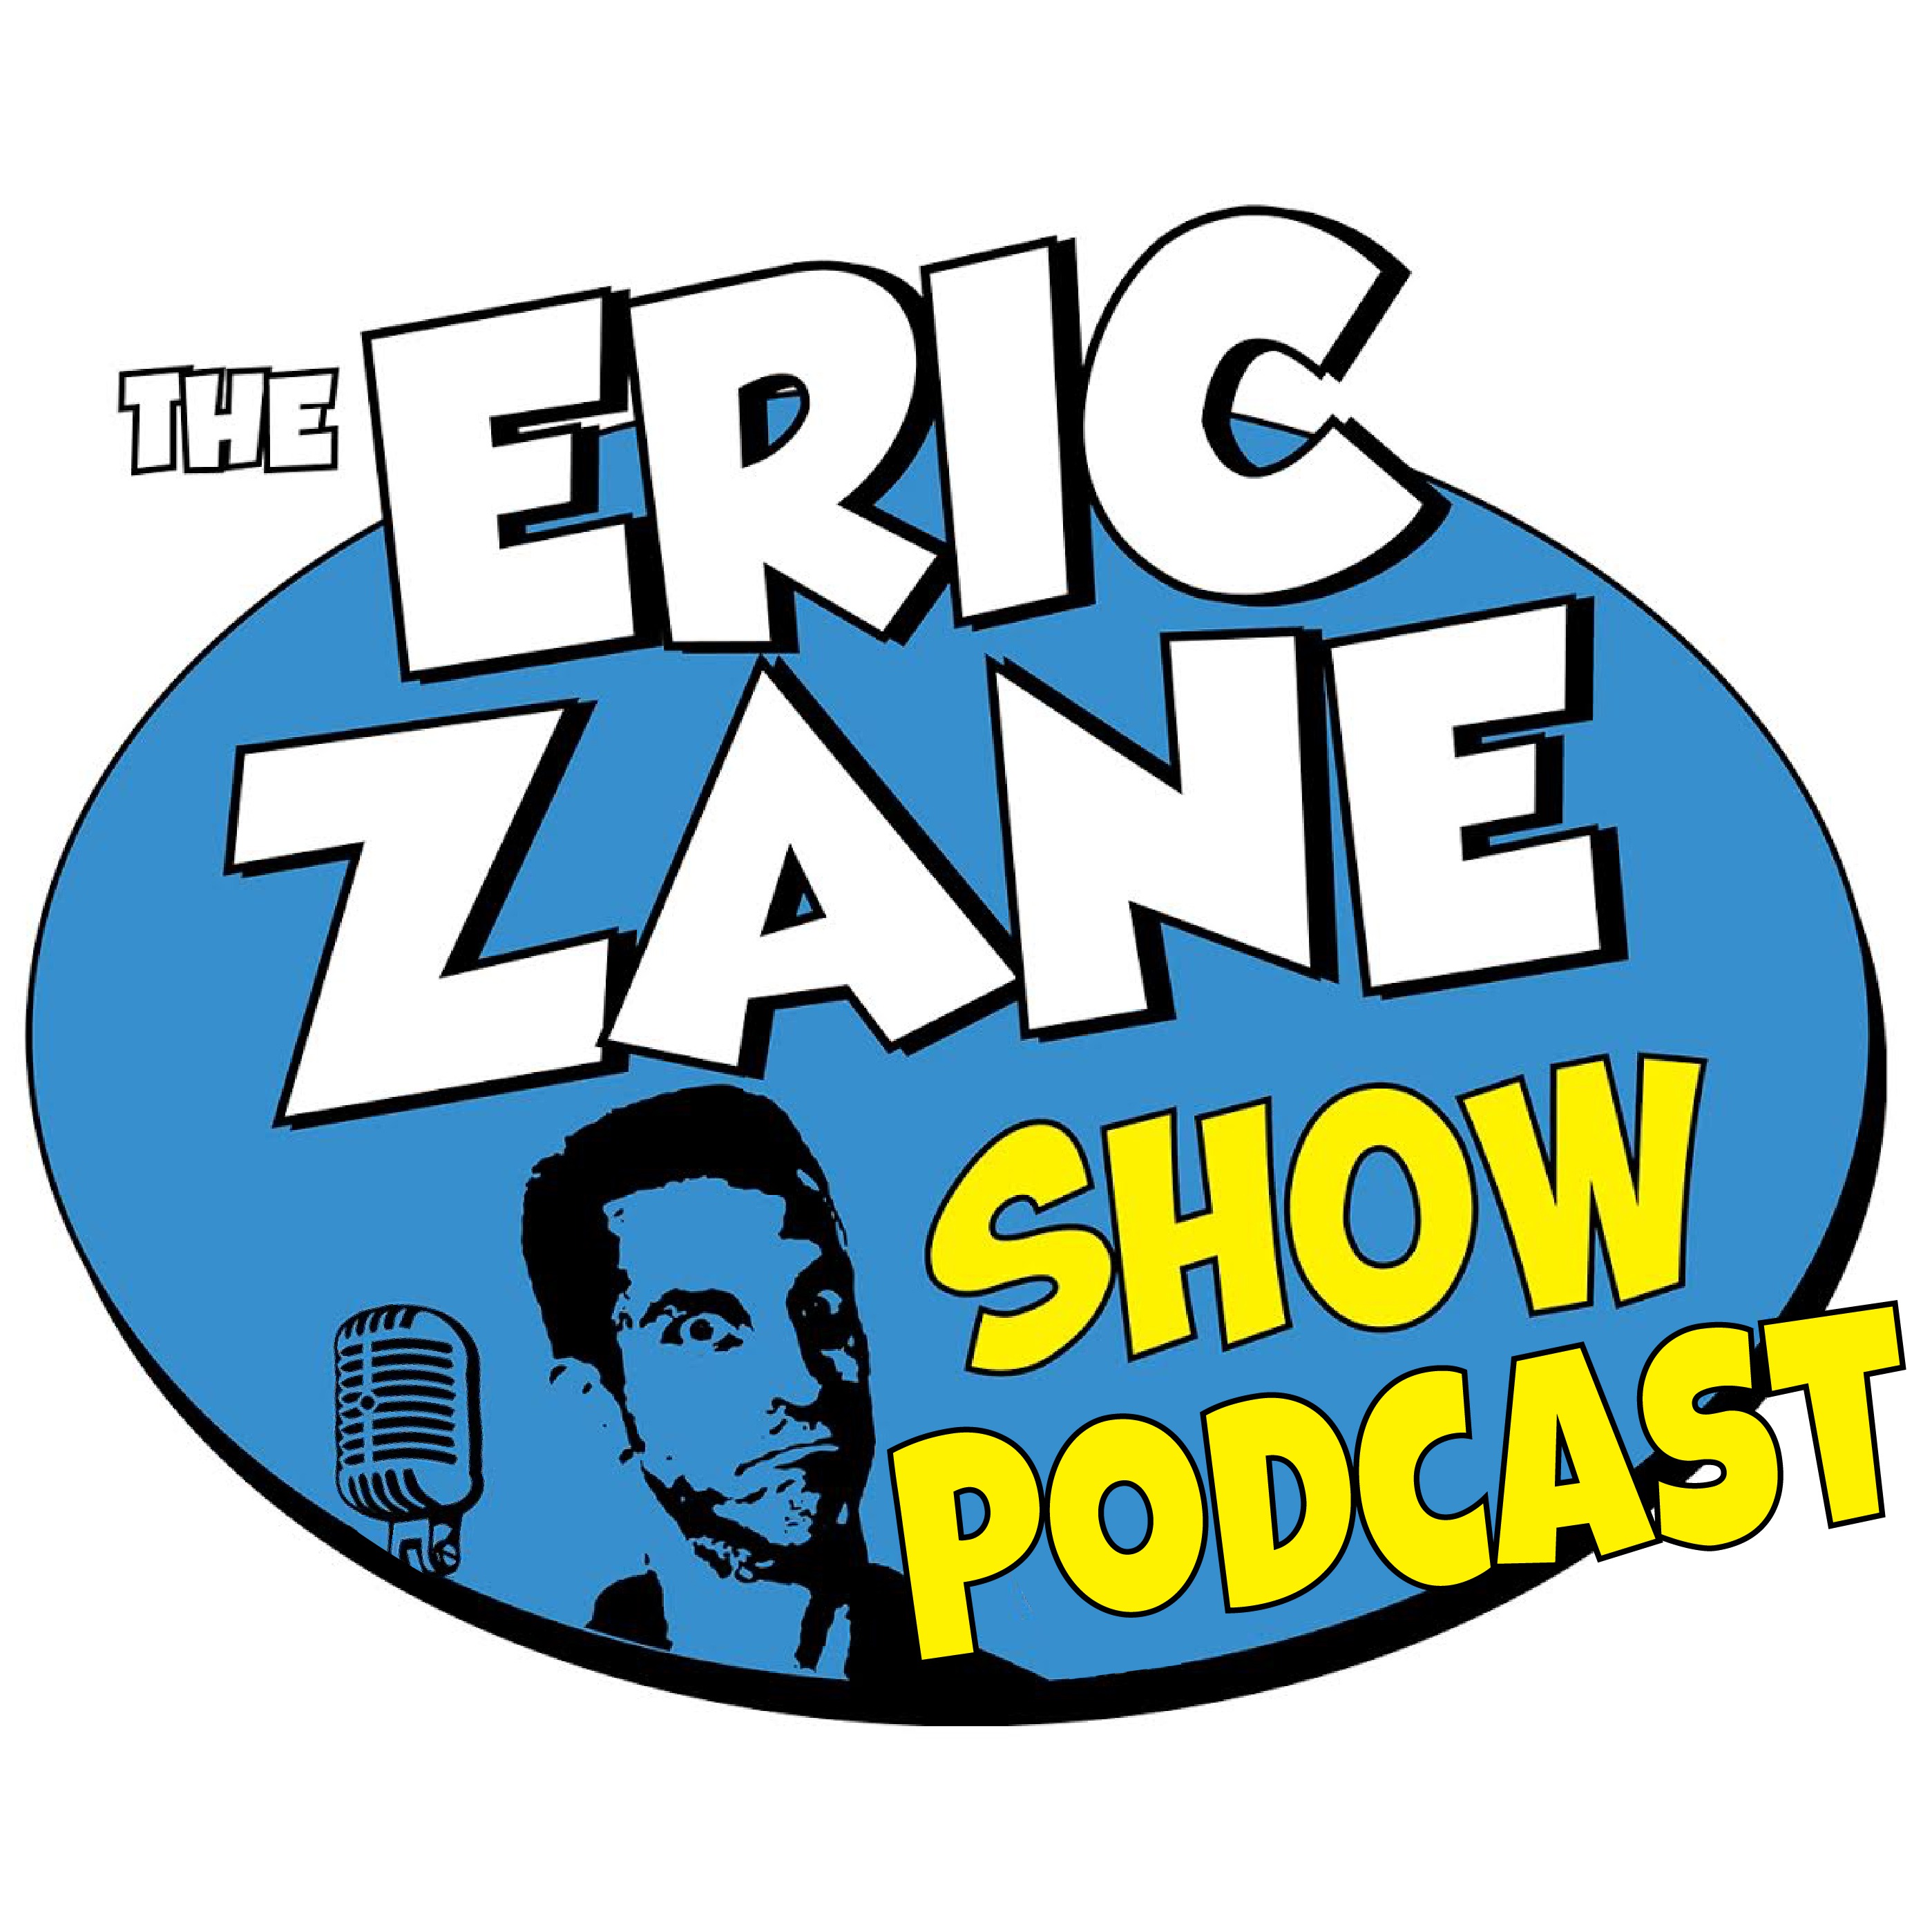 Eric Zane Show Podcast 910 Don't touch the nfk's mail